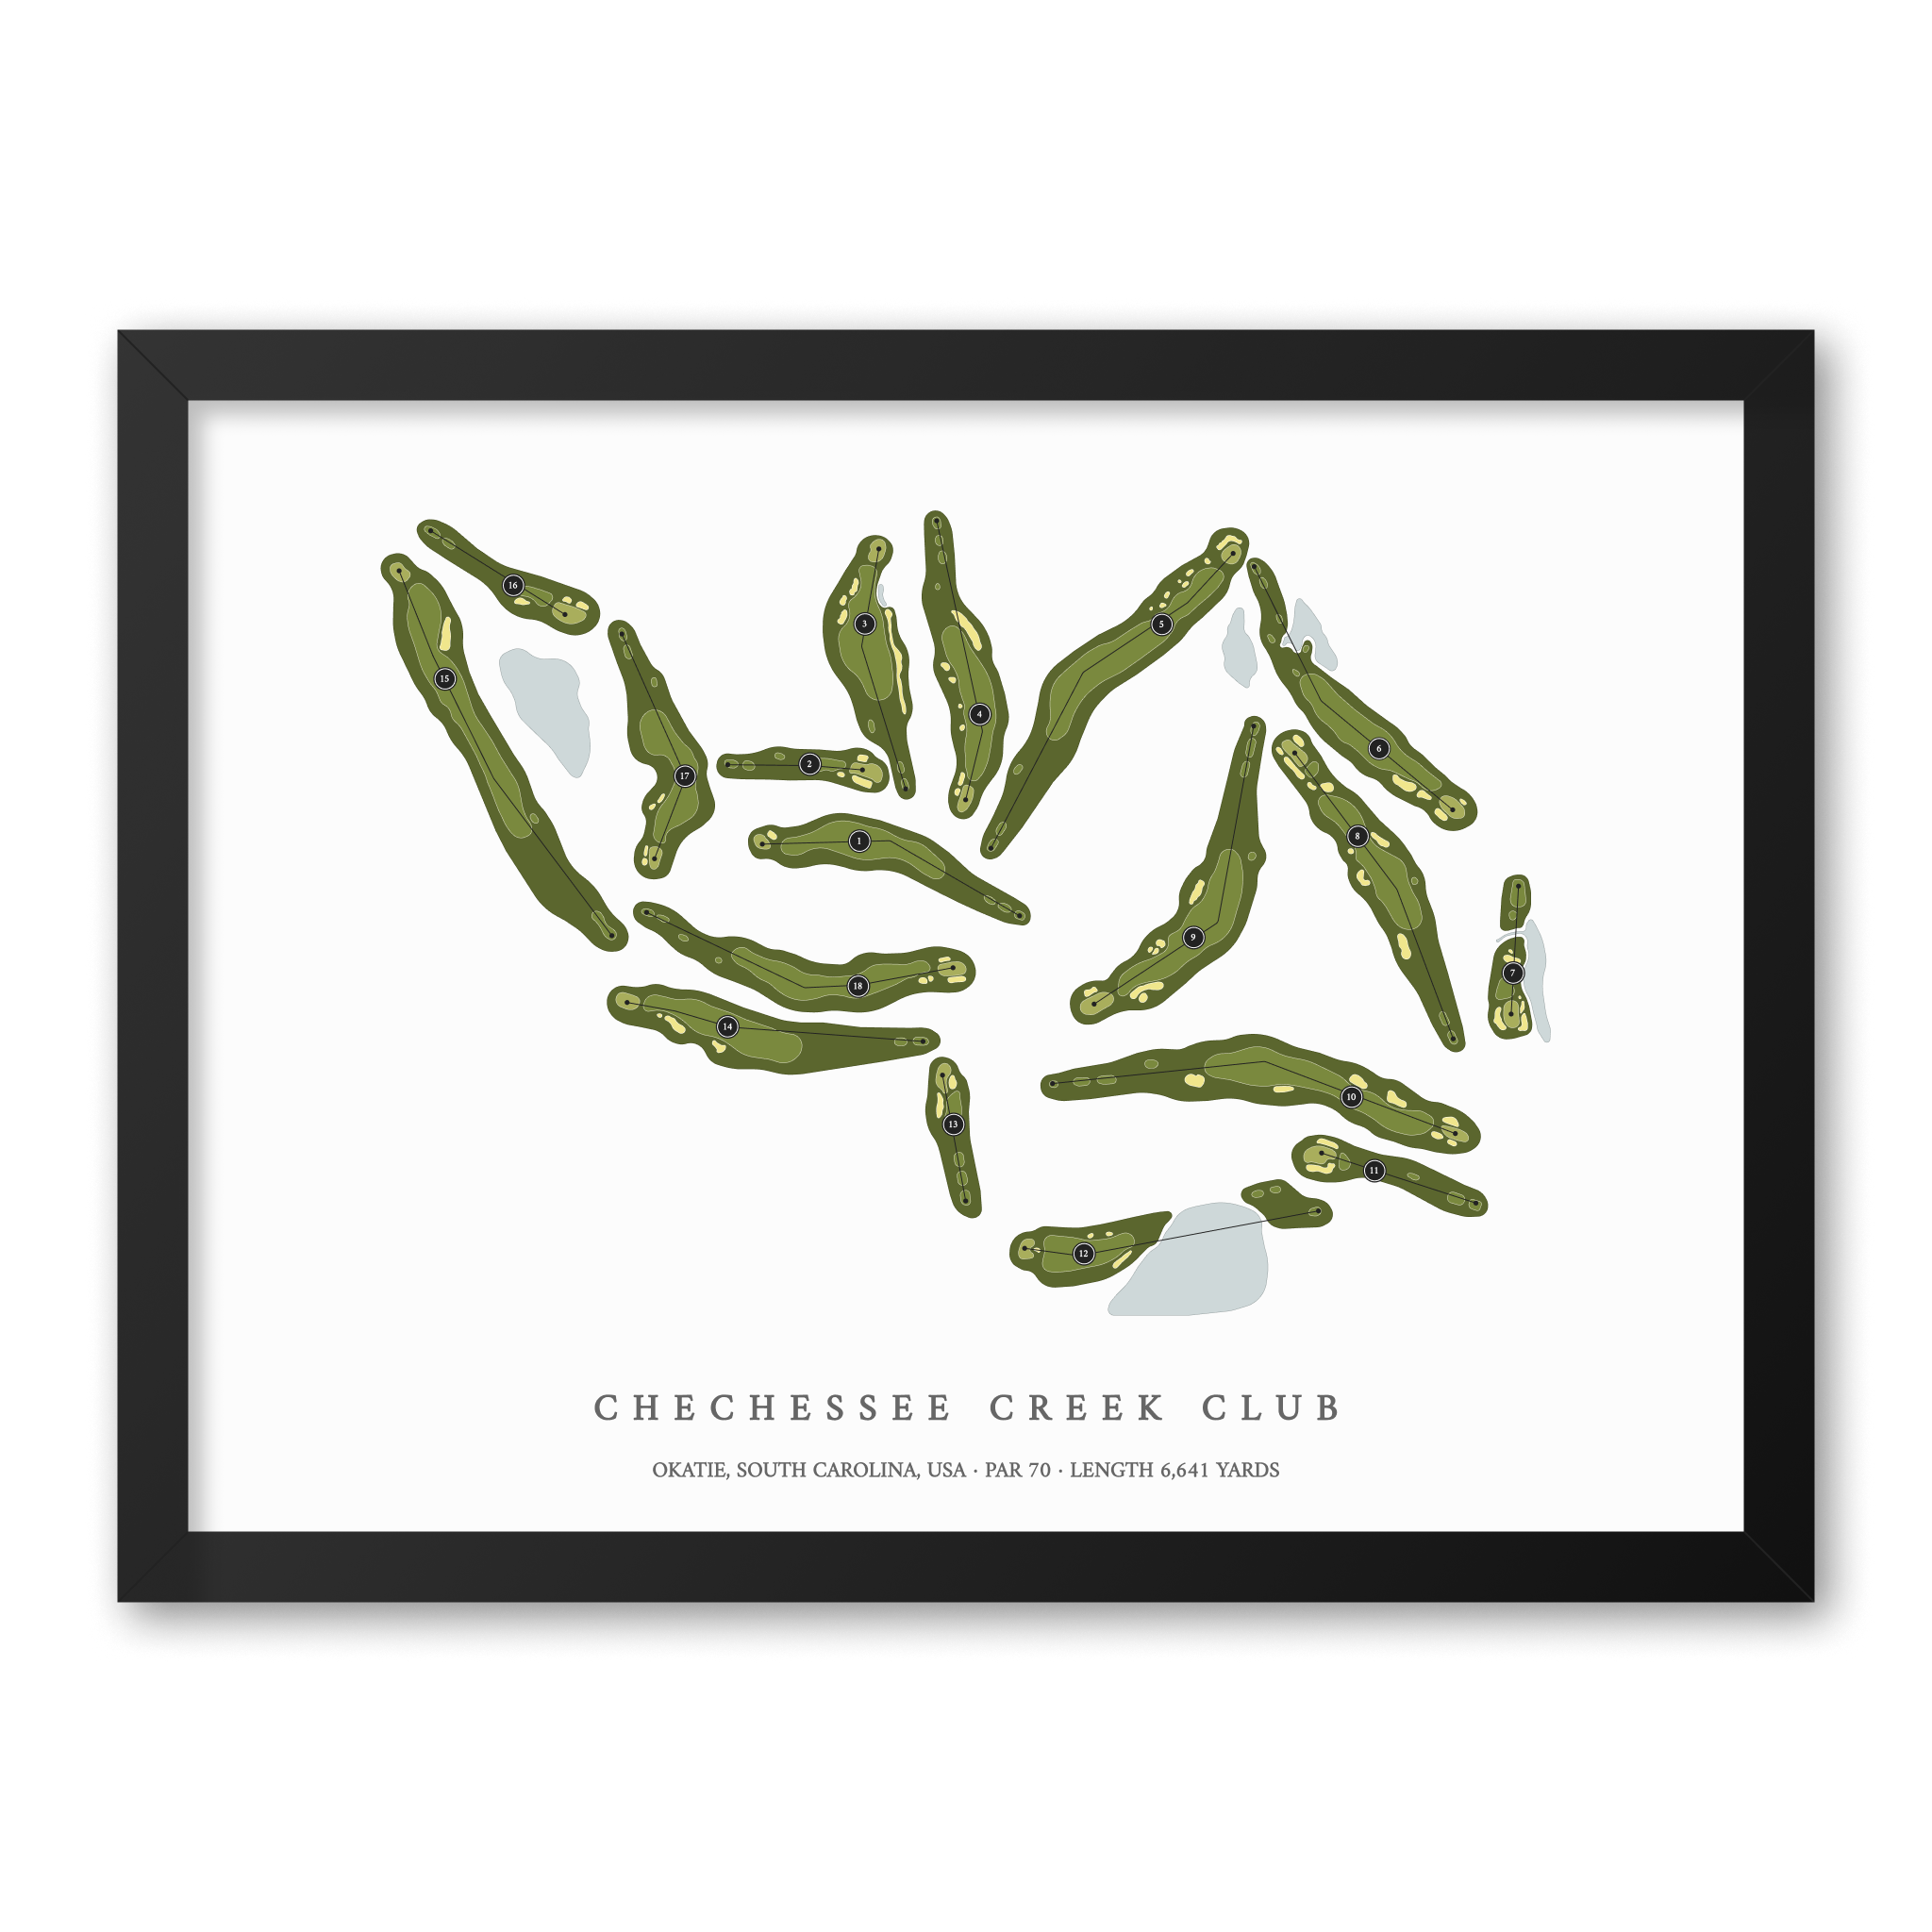 Chechessee Creek Club| Golf Course Print | Black Frame With Hole Numbers #hole numbers_yes